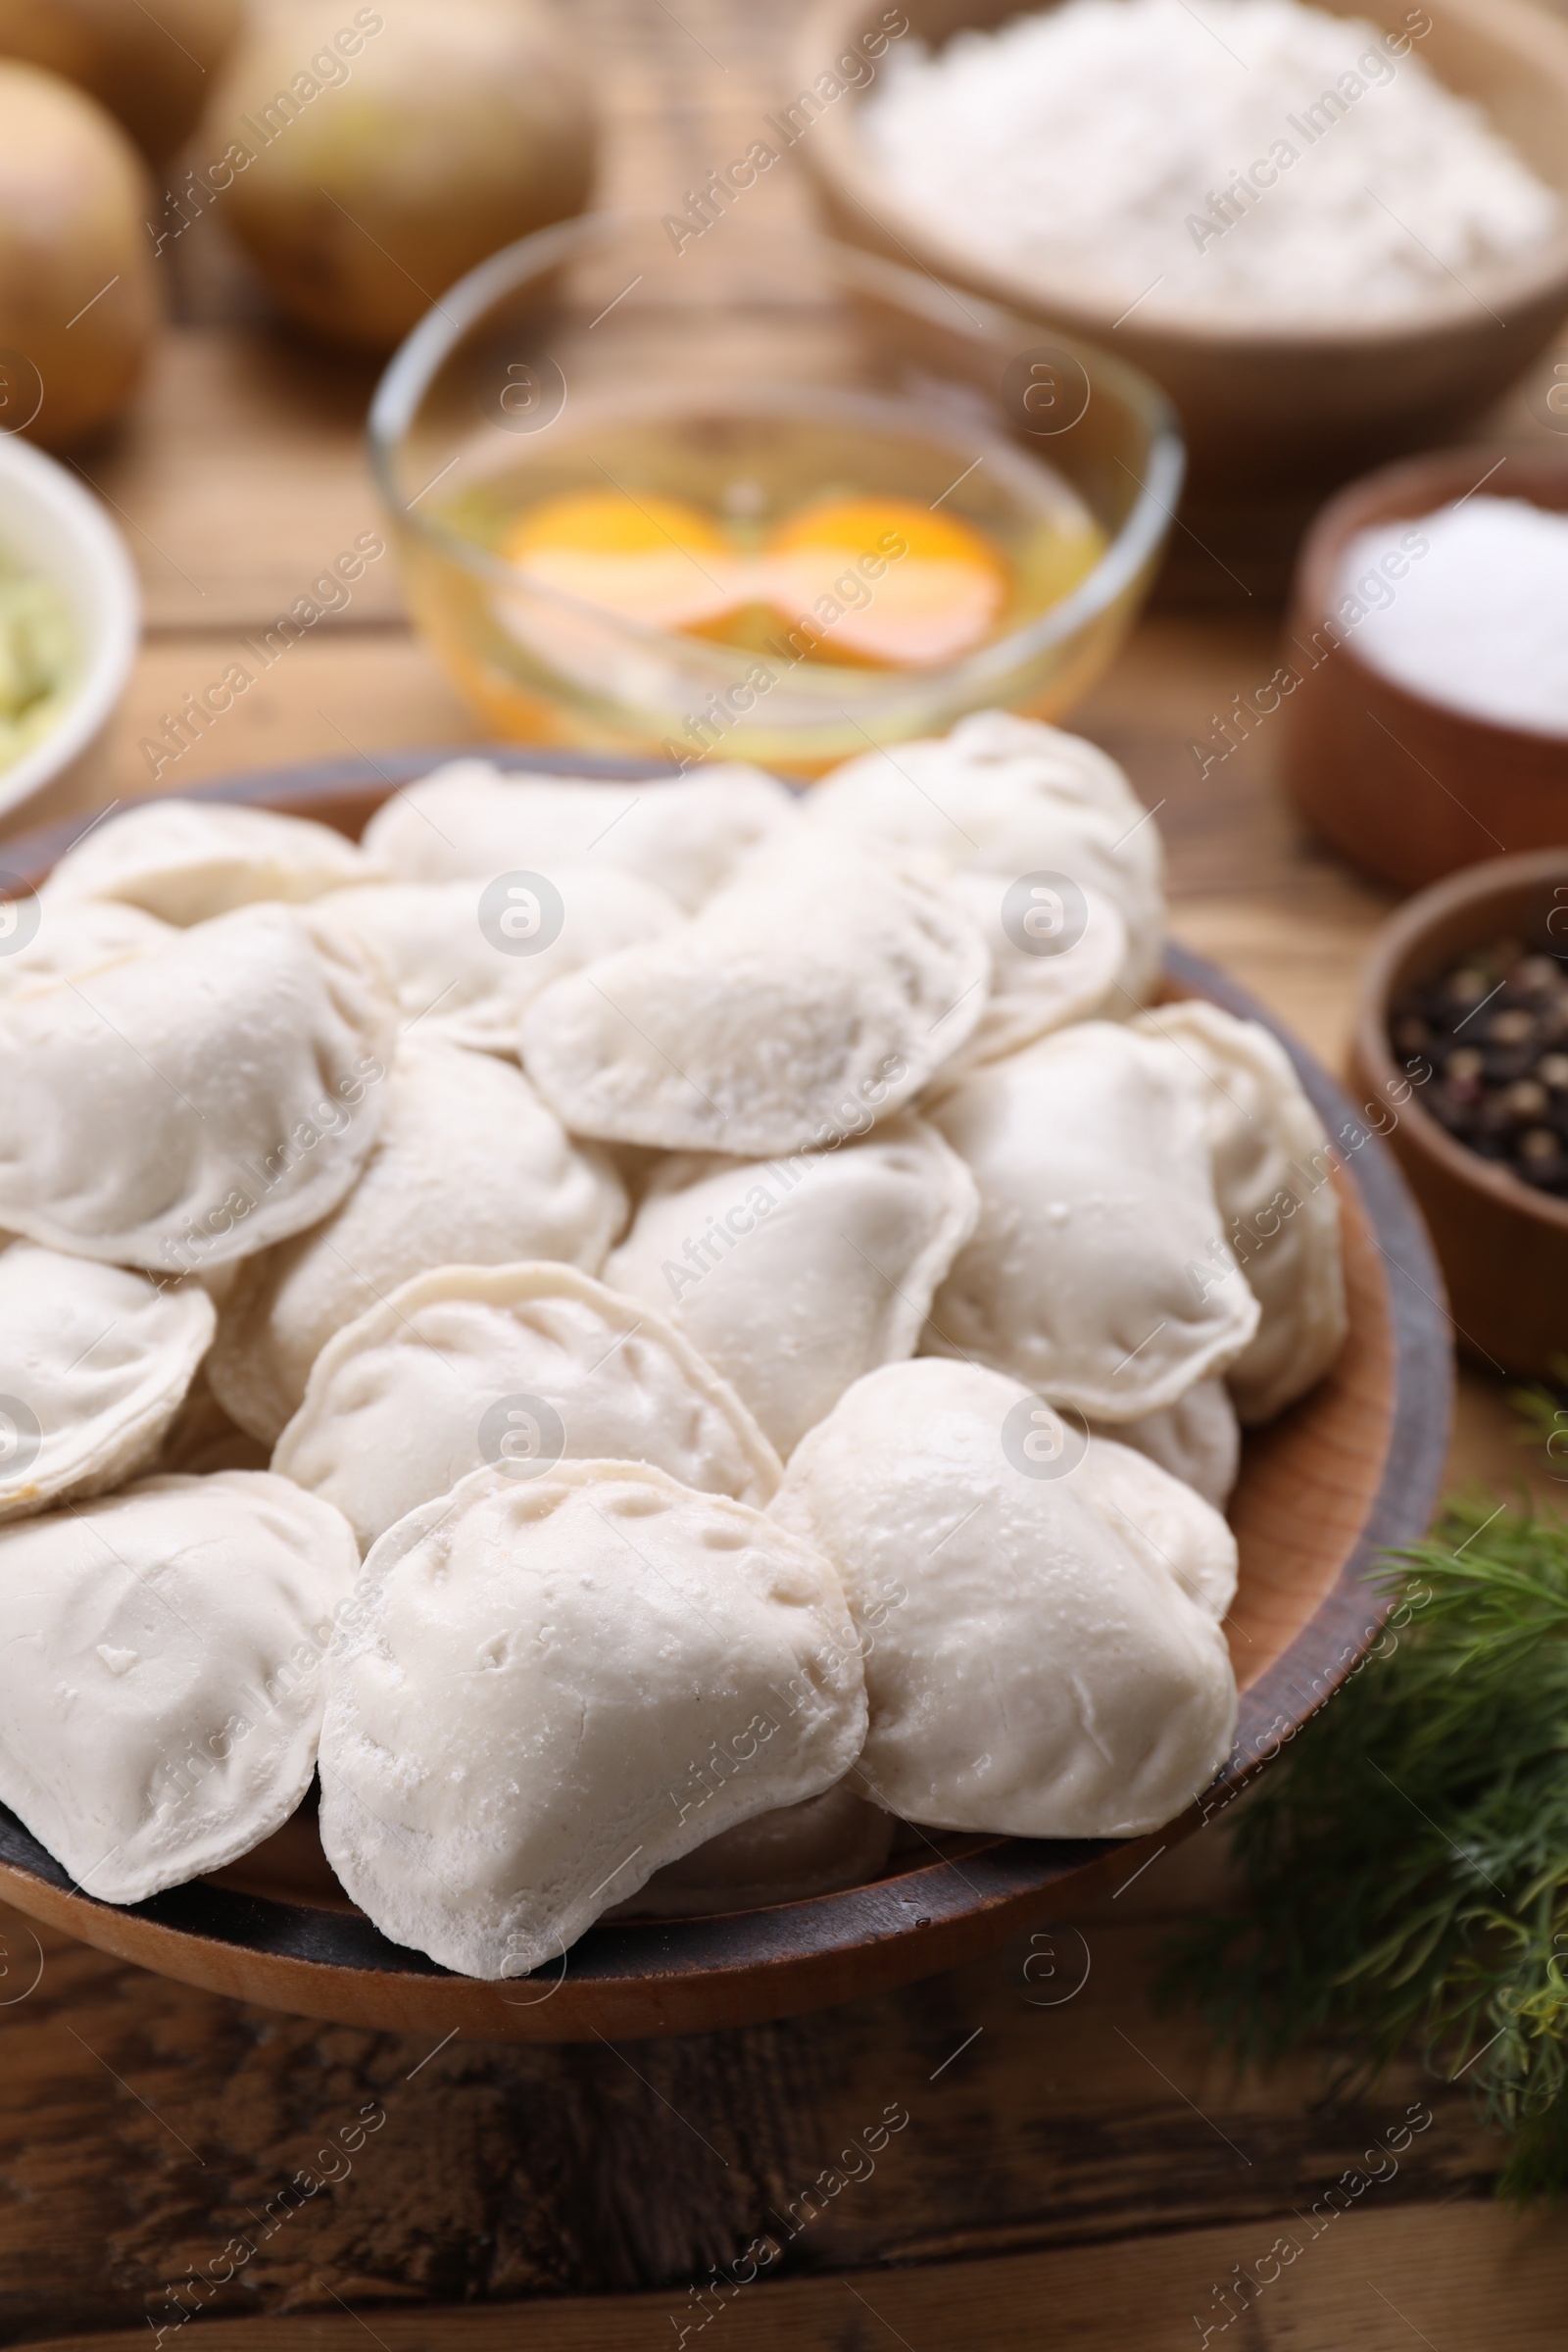 Photo of Raw dumplings (varenyky) and ingredients on wooden table, closeup